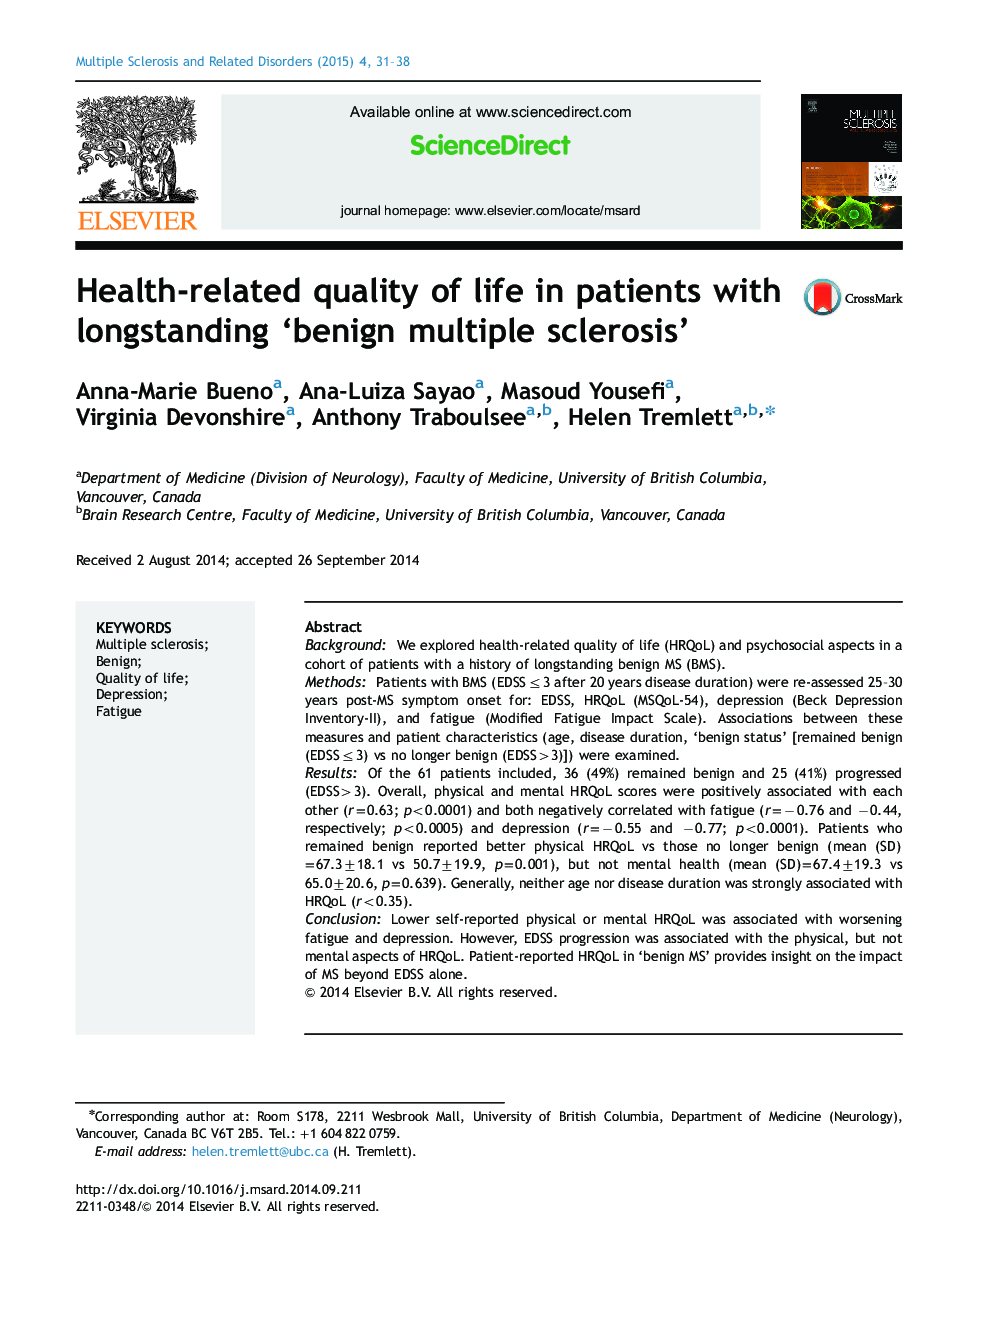 Health-related quality of life in patients with longstanding ‘benign multiple sclerosis’